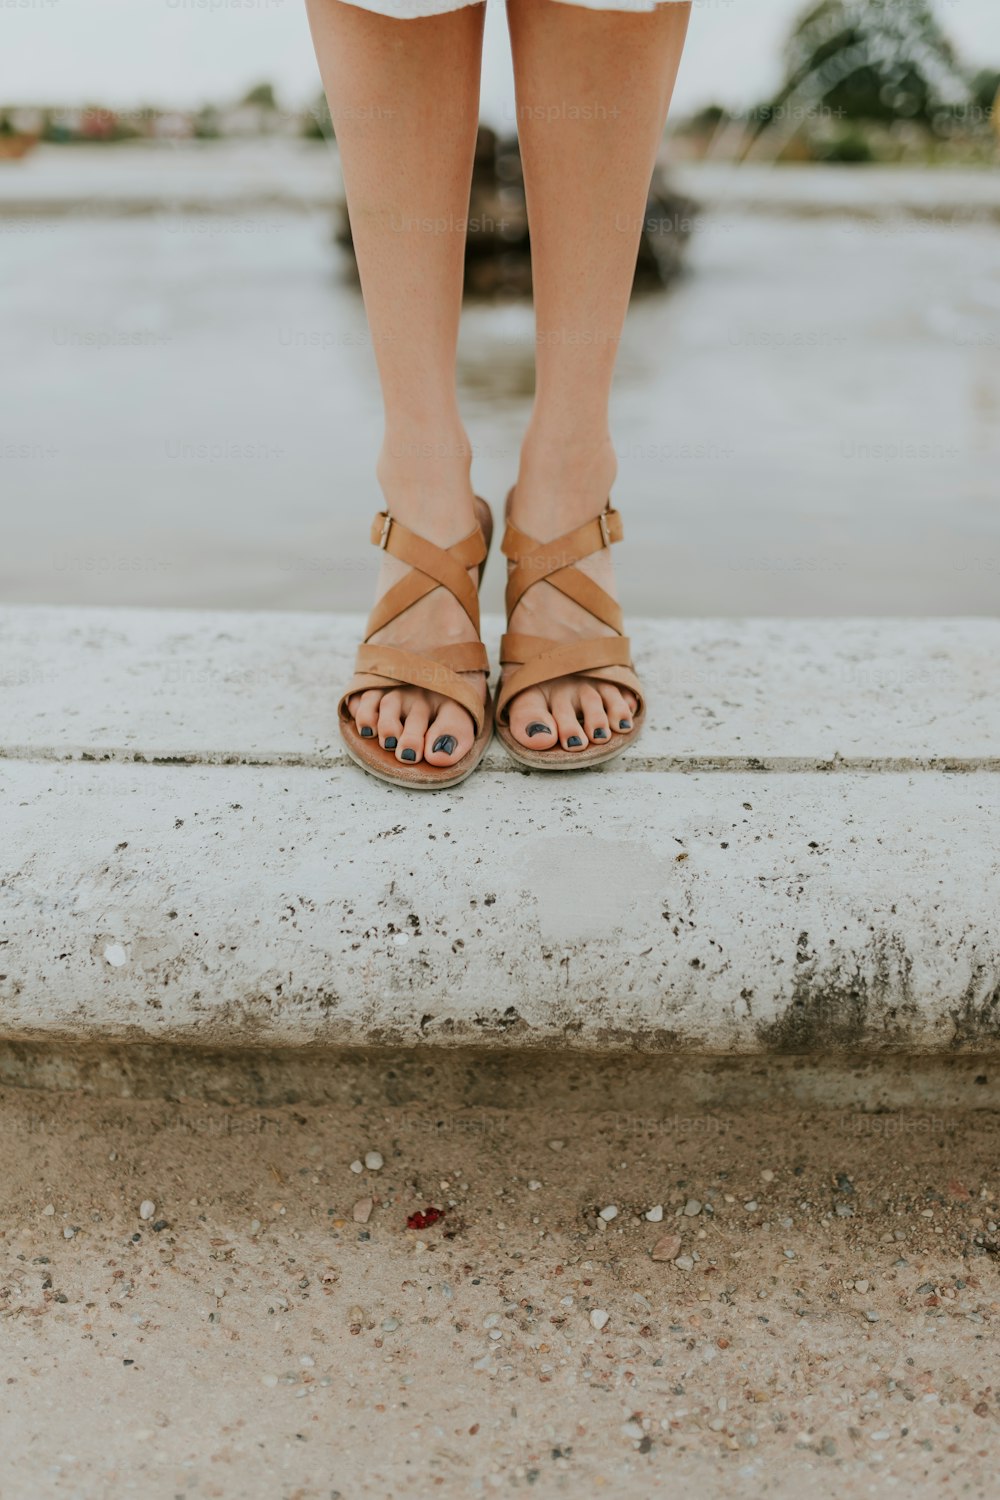 a woman's feet in sandals standing on a ledge